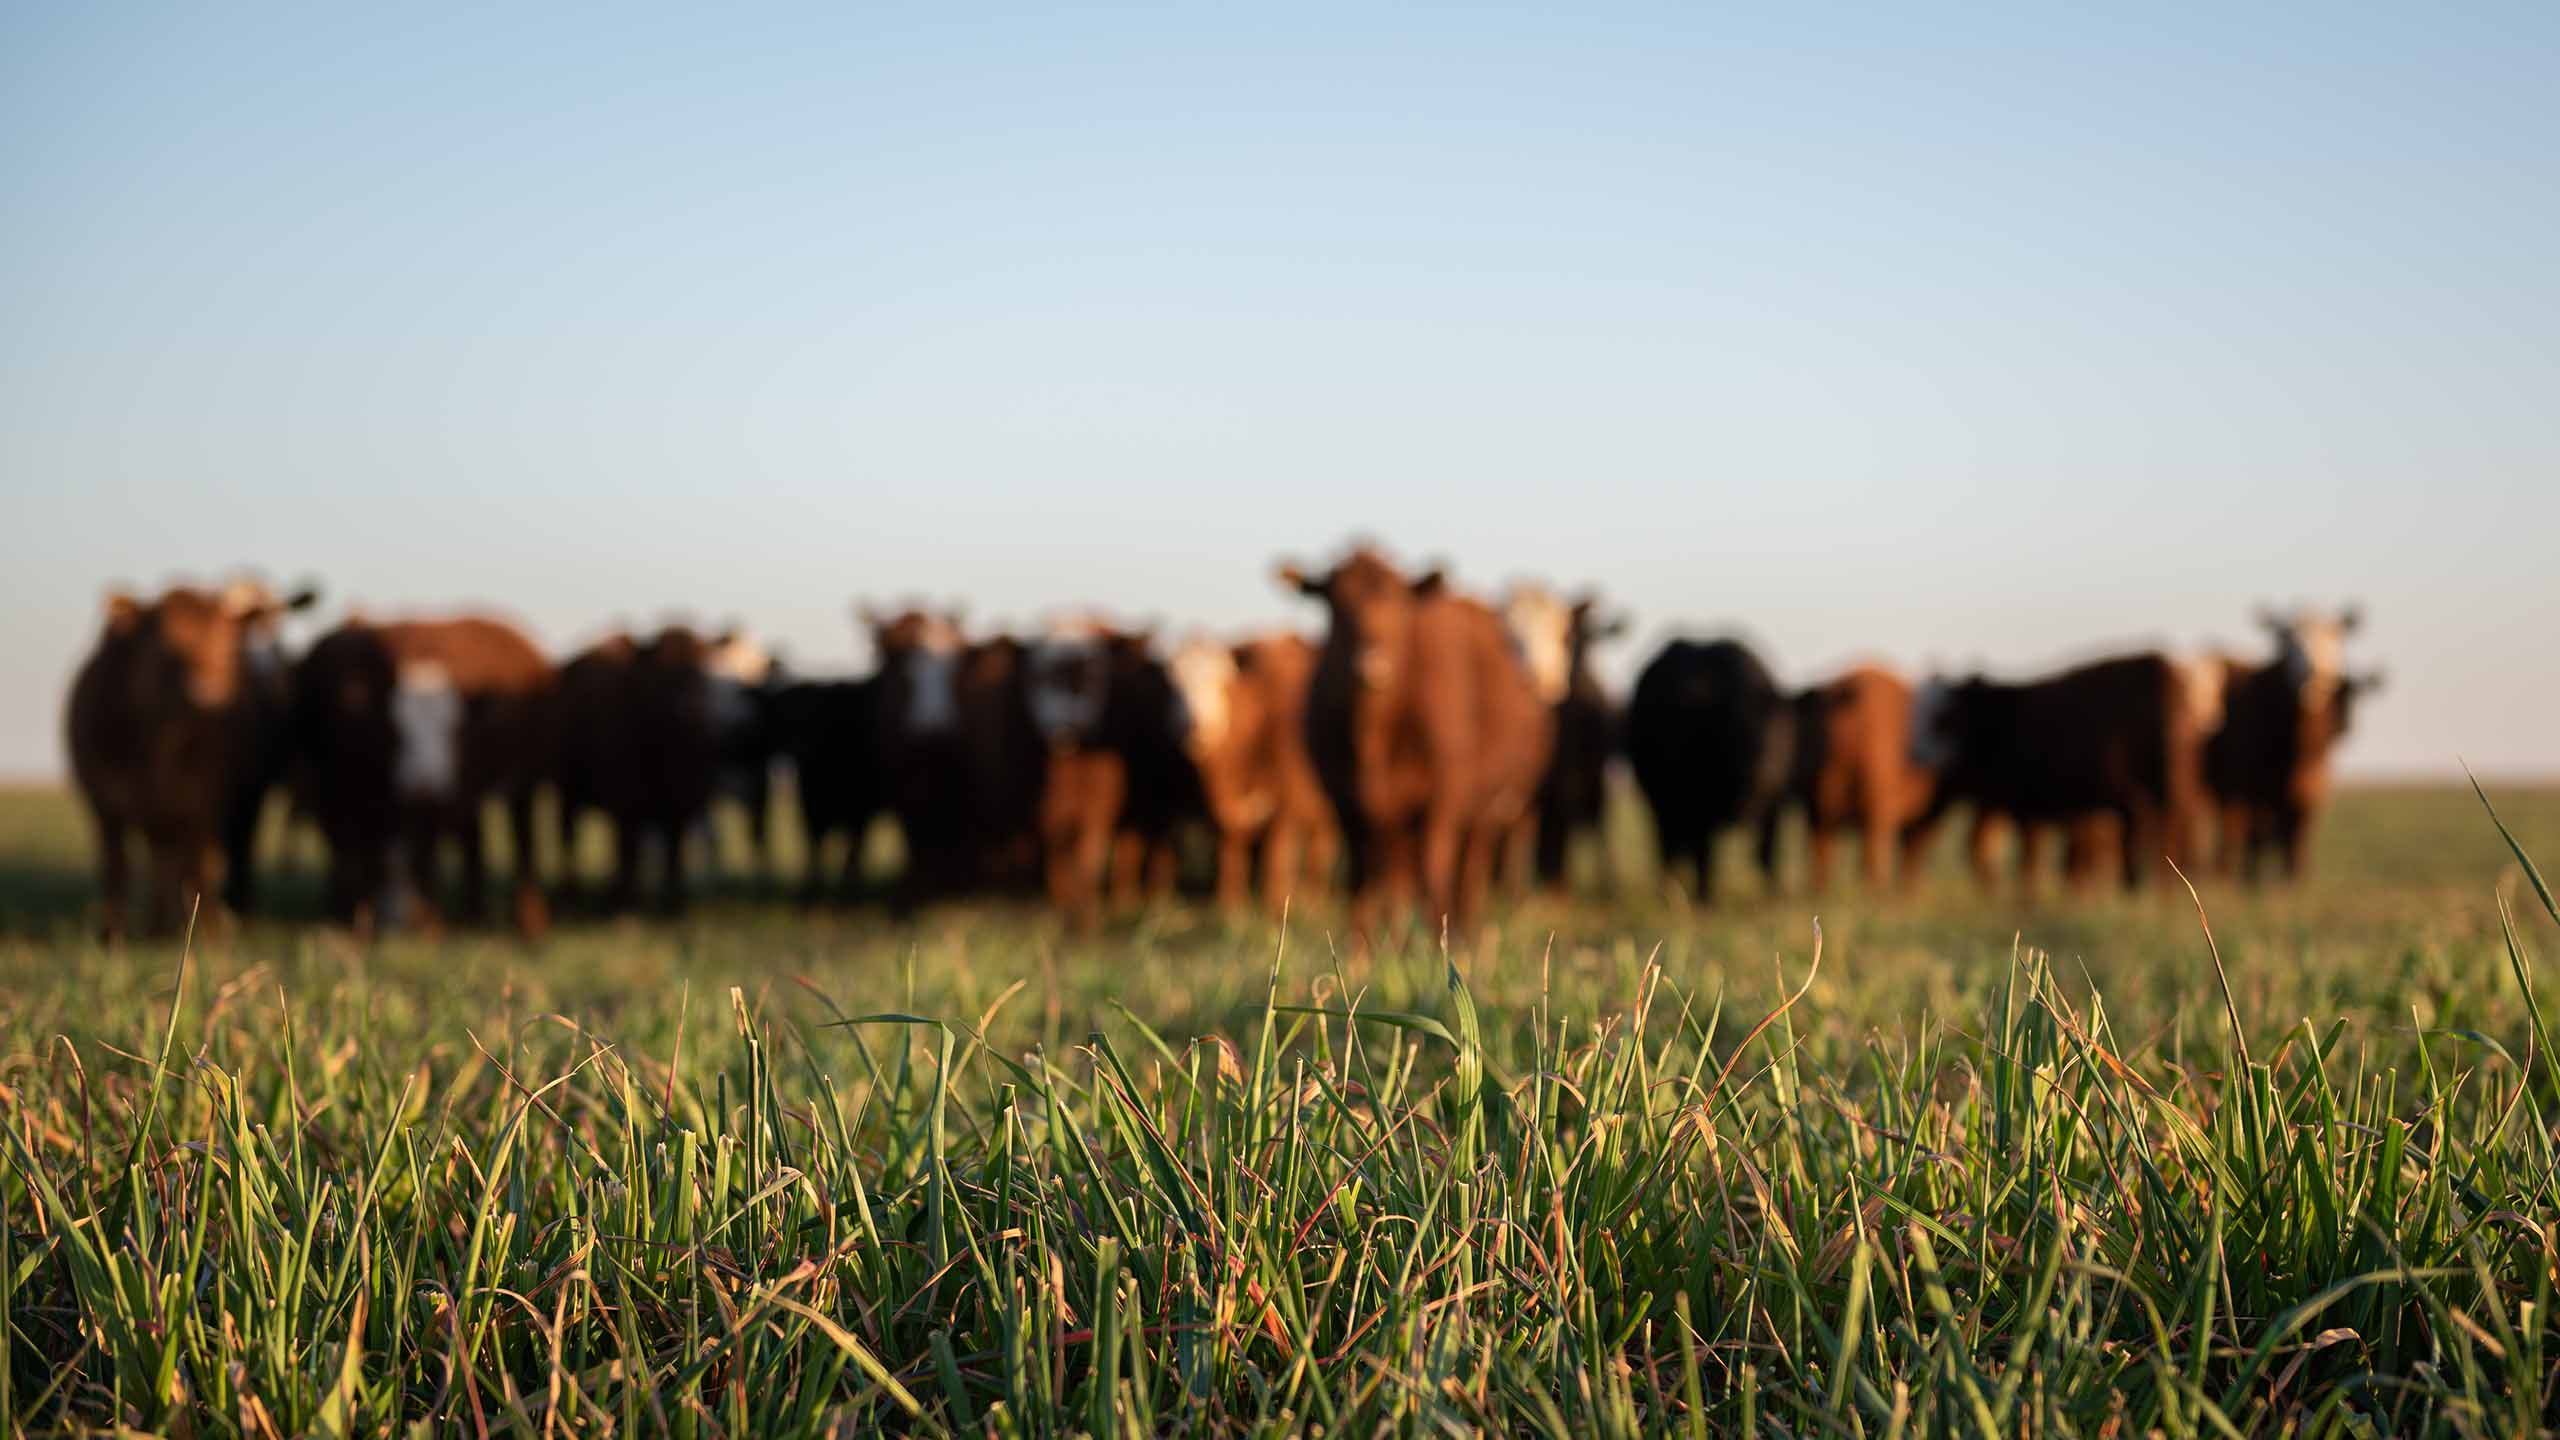 Image of beef cattle standing in a row with green grass in foreground and blue sky above